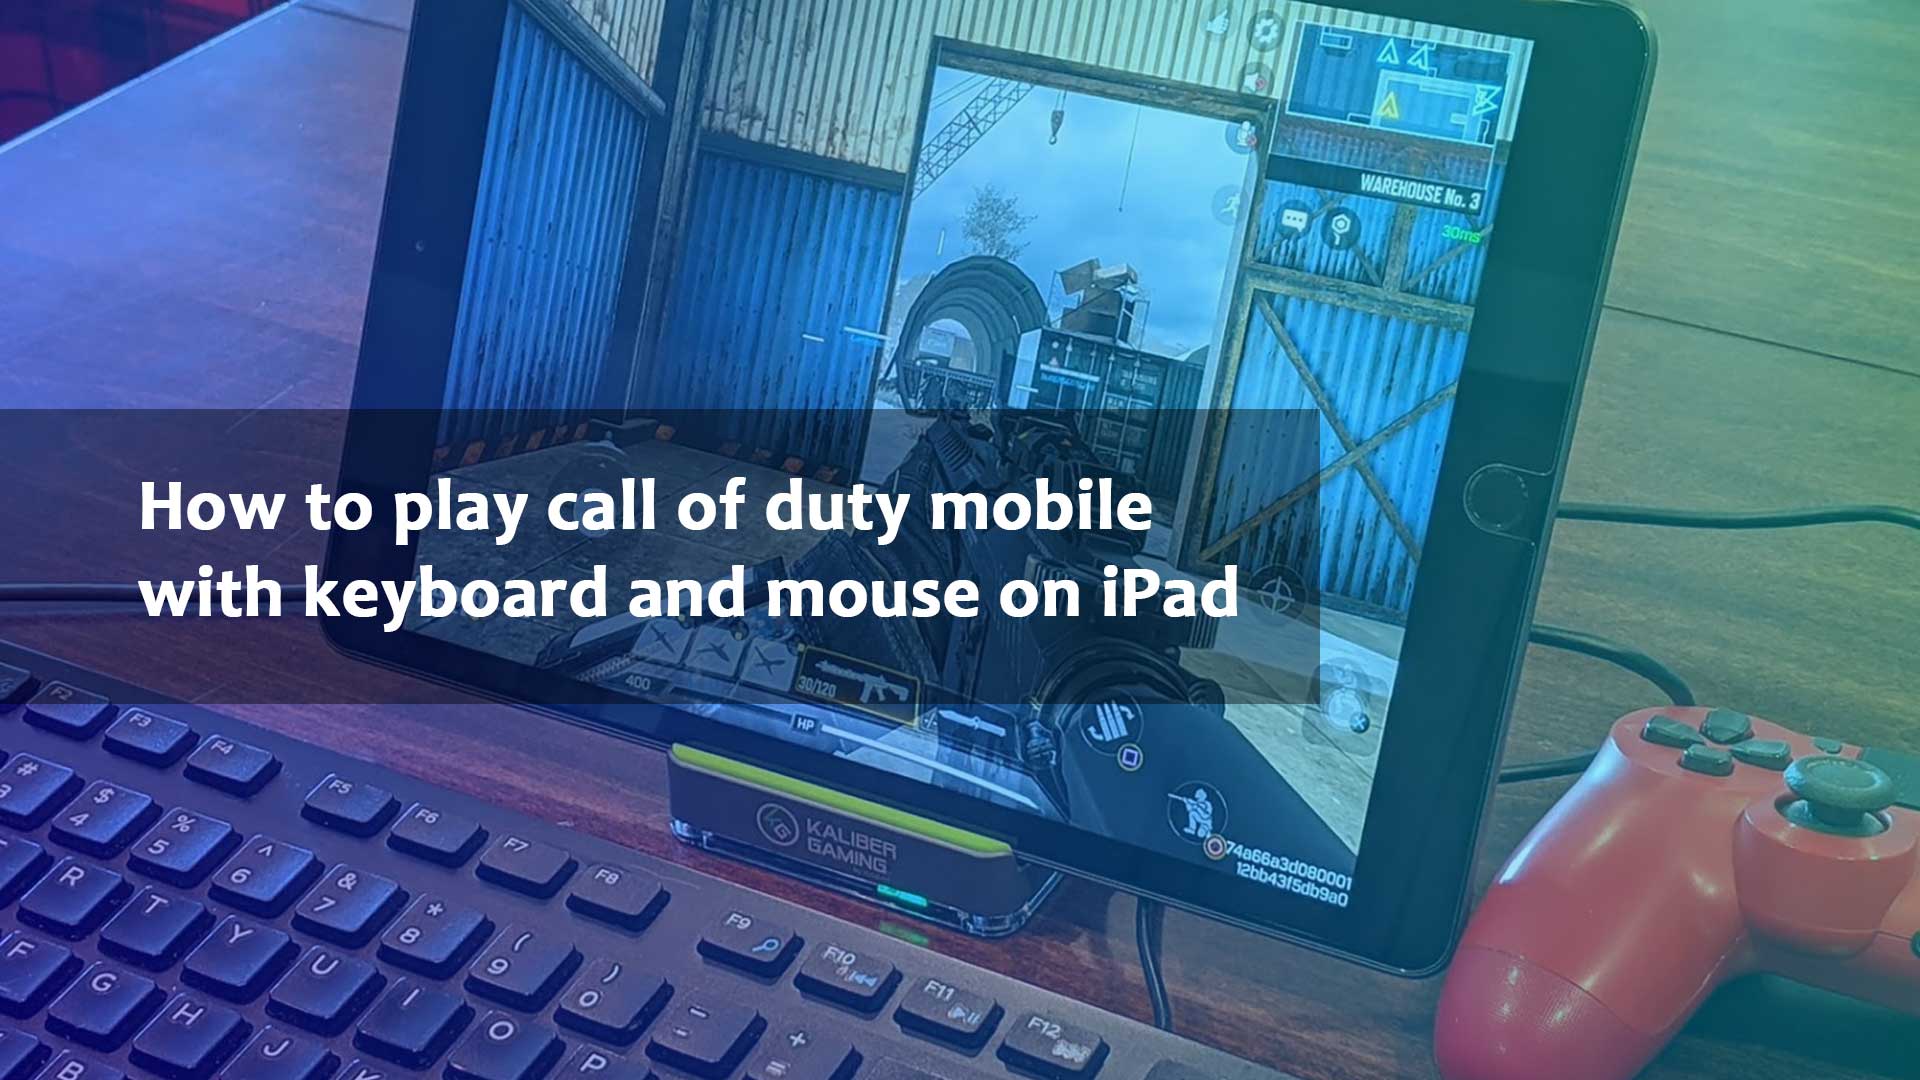 How to play call of duty mobile with keyboard and mouse on iPad